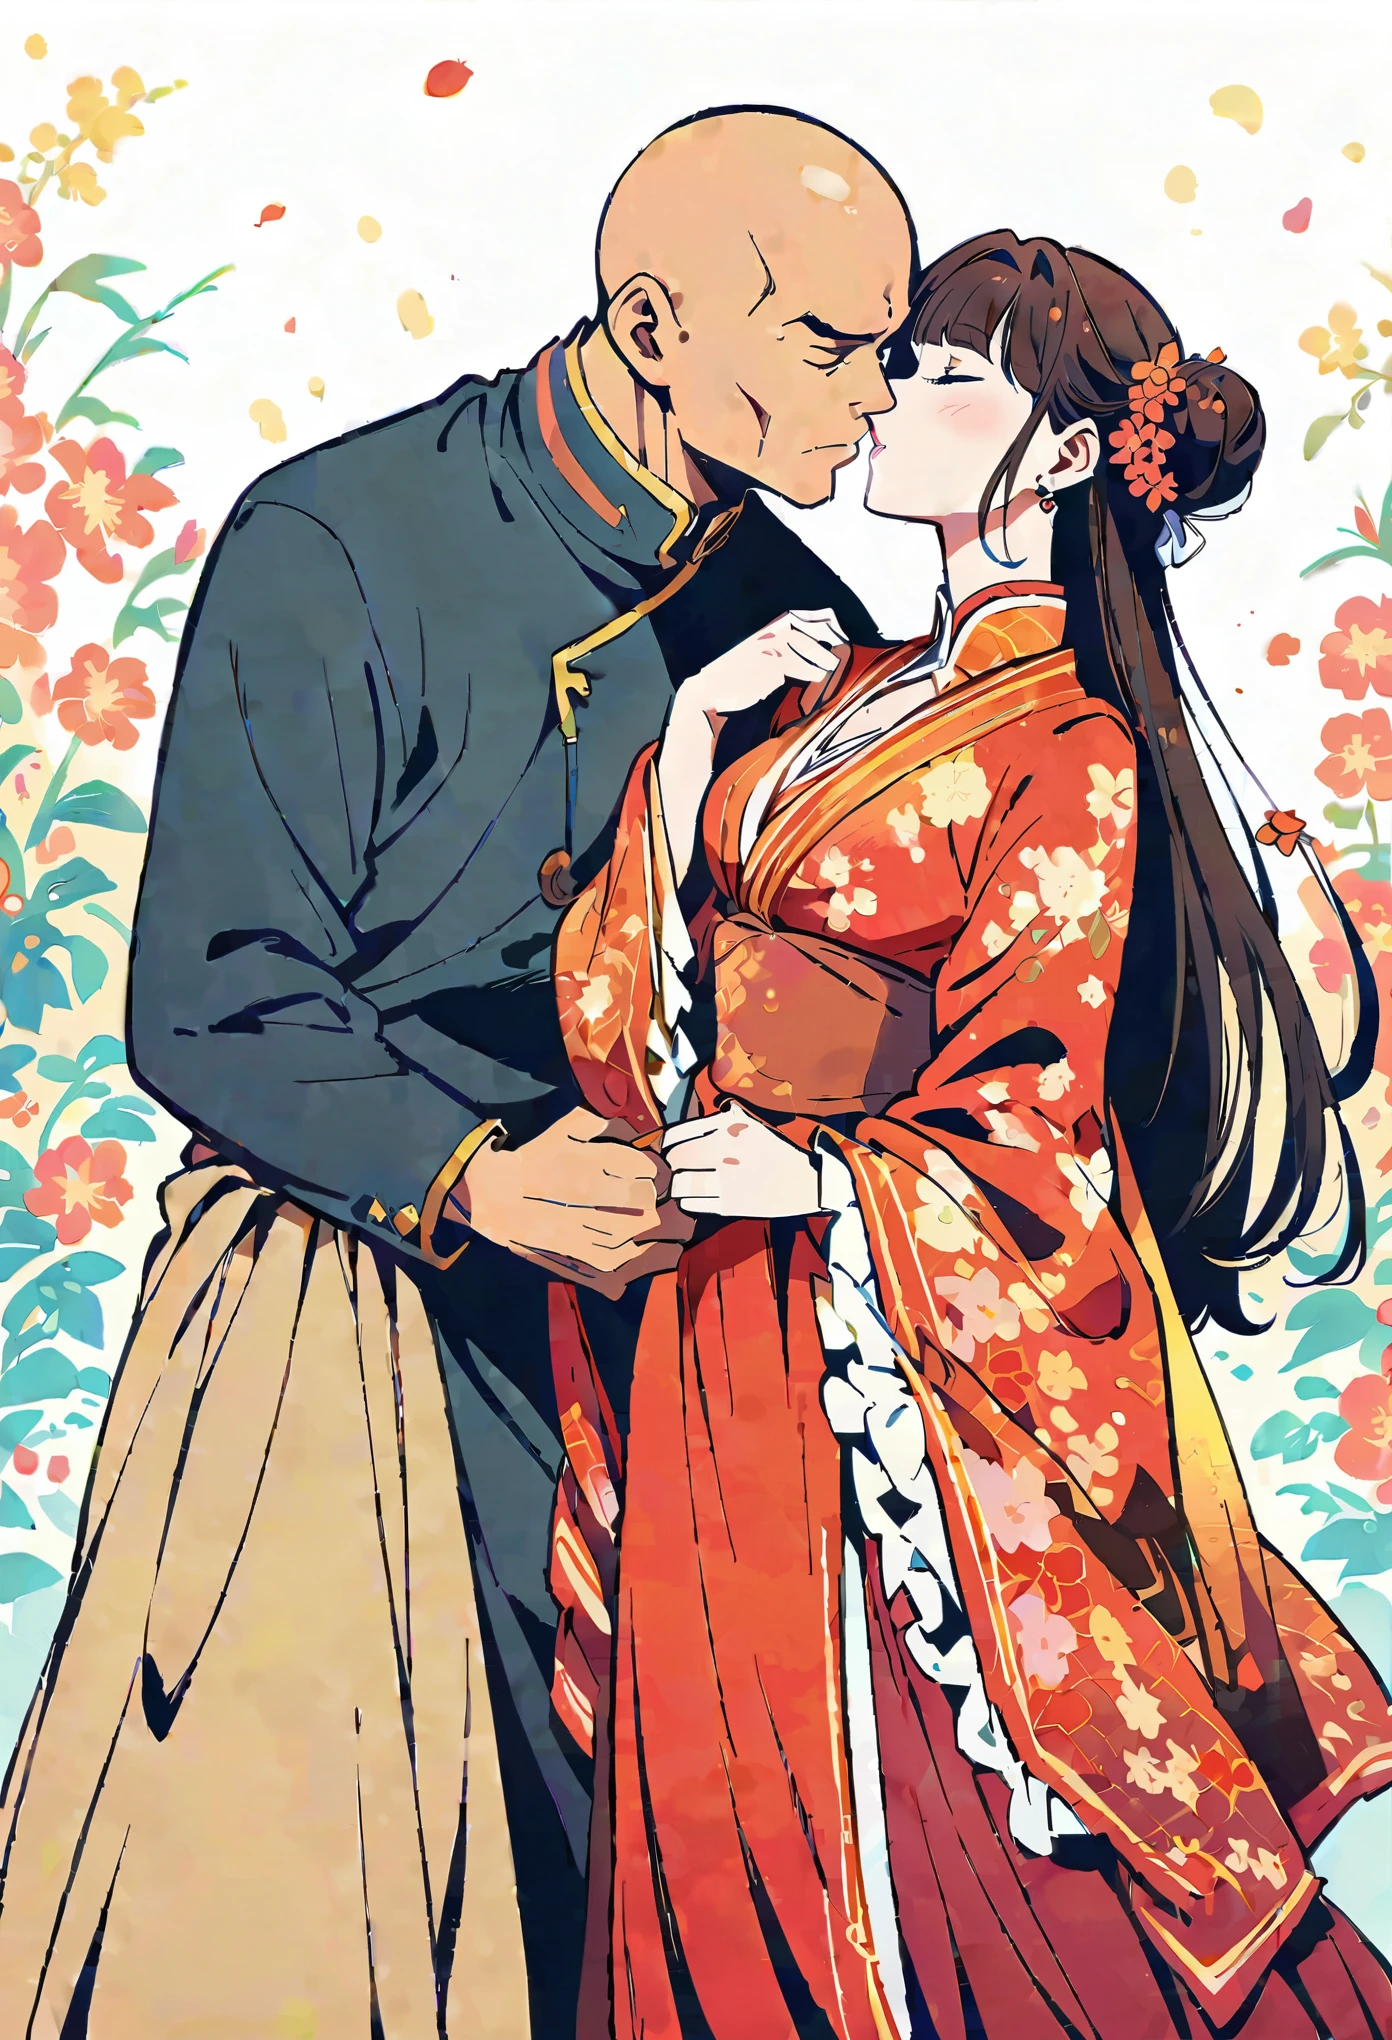 Chinese anime, a bald man and an elegant woman in red dress standing under the umbrella together, white background, in the style of Japanese comics .anime shounen illustration in the style of , an ancient bald man and beautiful woman in red dress stand under the umbrella together, he gently holds her head to his for a kiss, she wears very long hair in buns with bangs covering half of her face, wearing traditional , dreamy romantic atmosphere in full color